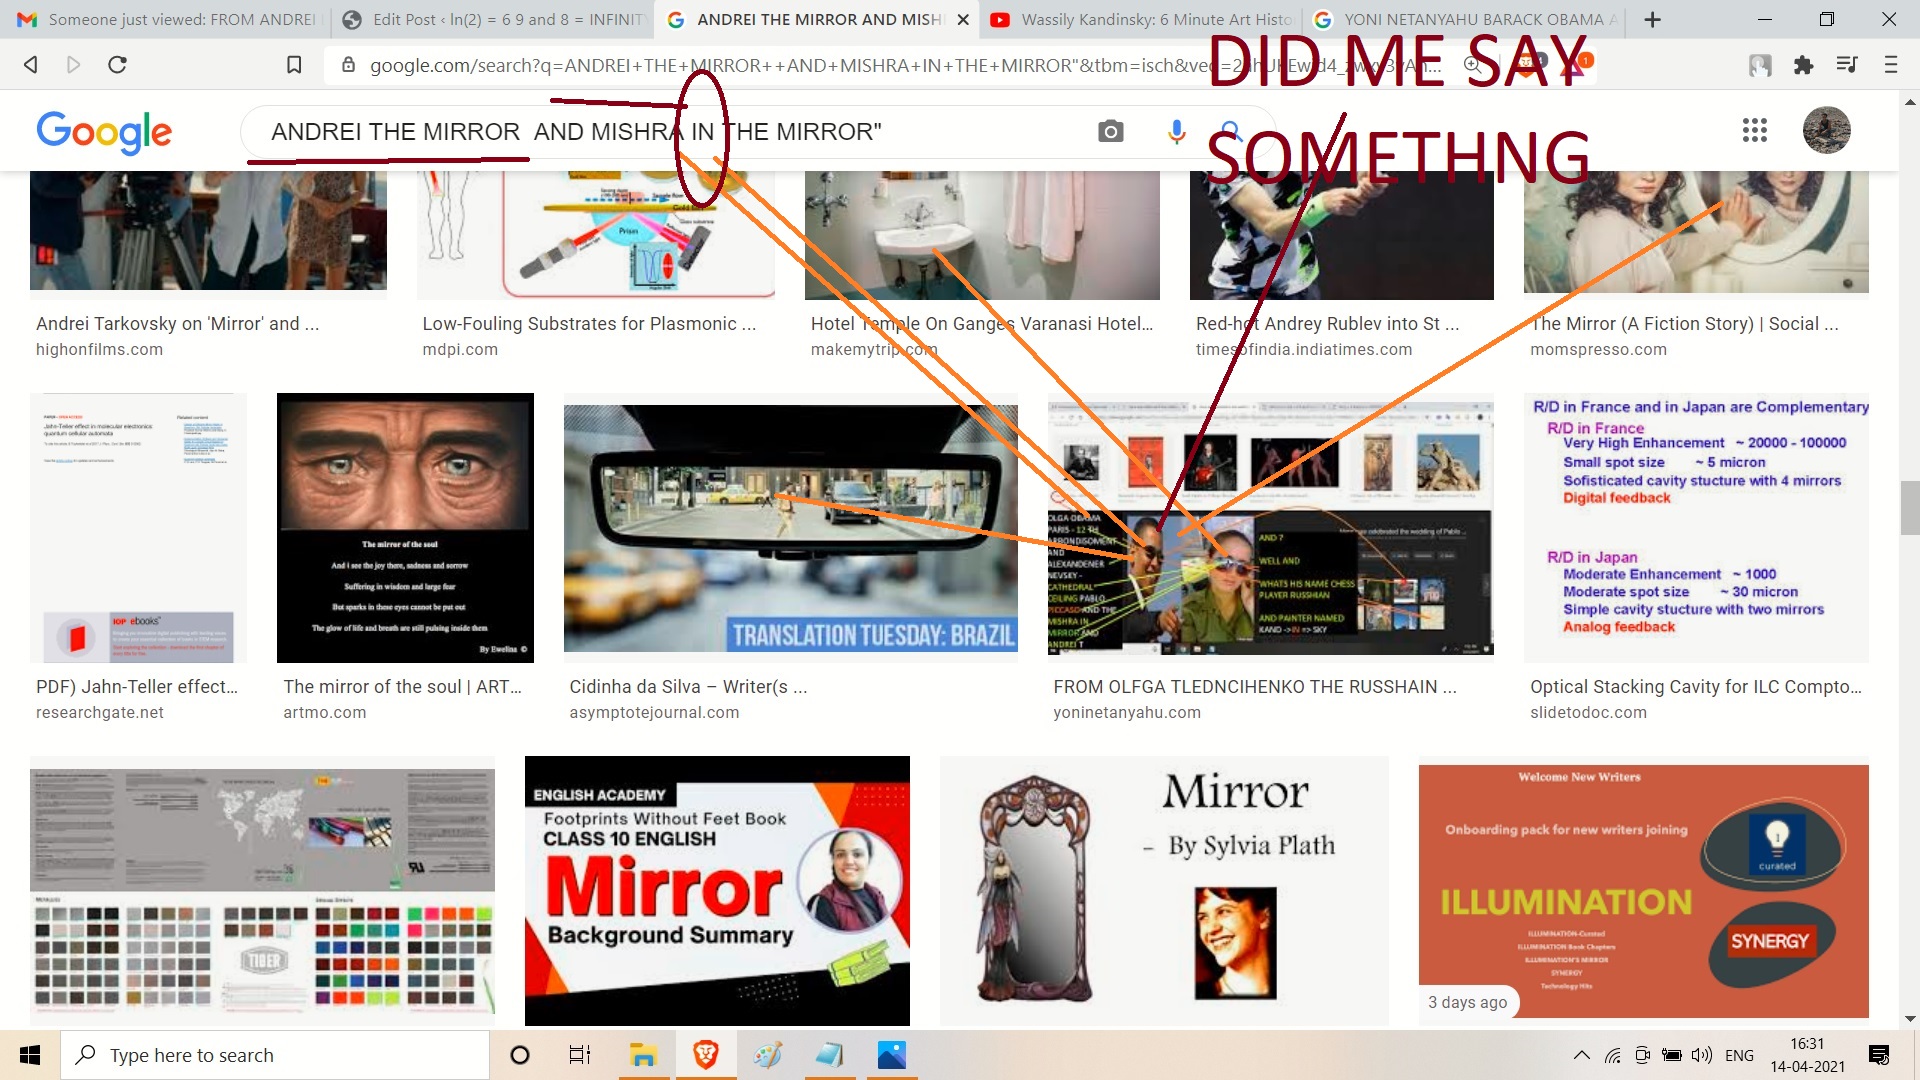 ANDREI THE MIRROR AND MISHRA IN THE MIRROR - GOOGLE SAYS 12